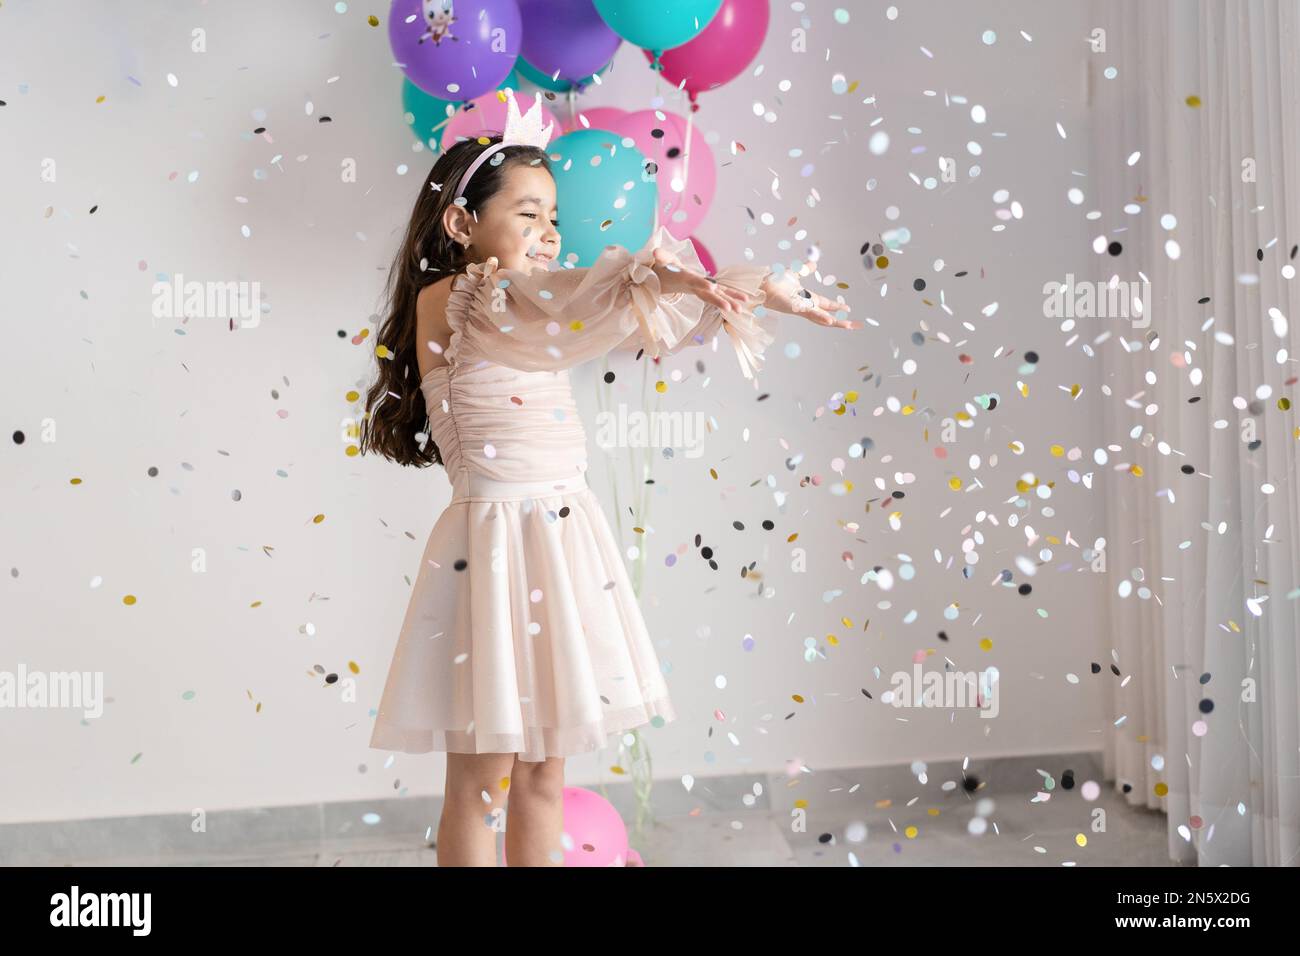 A little brunette girl in a pink dress and crown smiling and throwing colorful eco-friendly paper confetti, confetti falling down on her. White background full of paper circles. Stock Photo